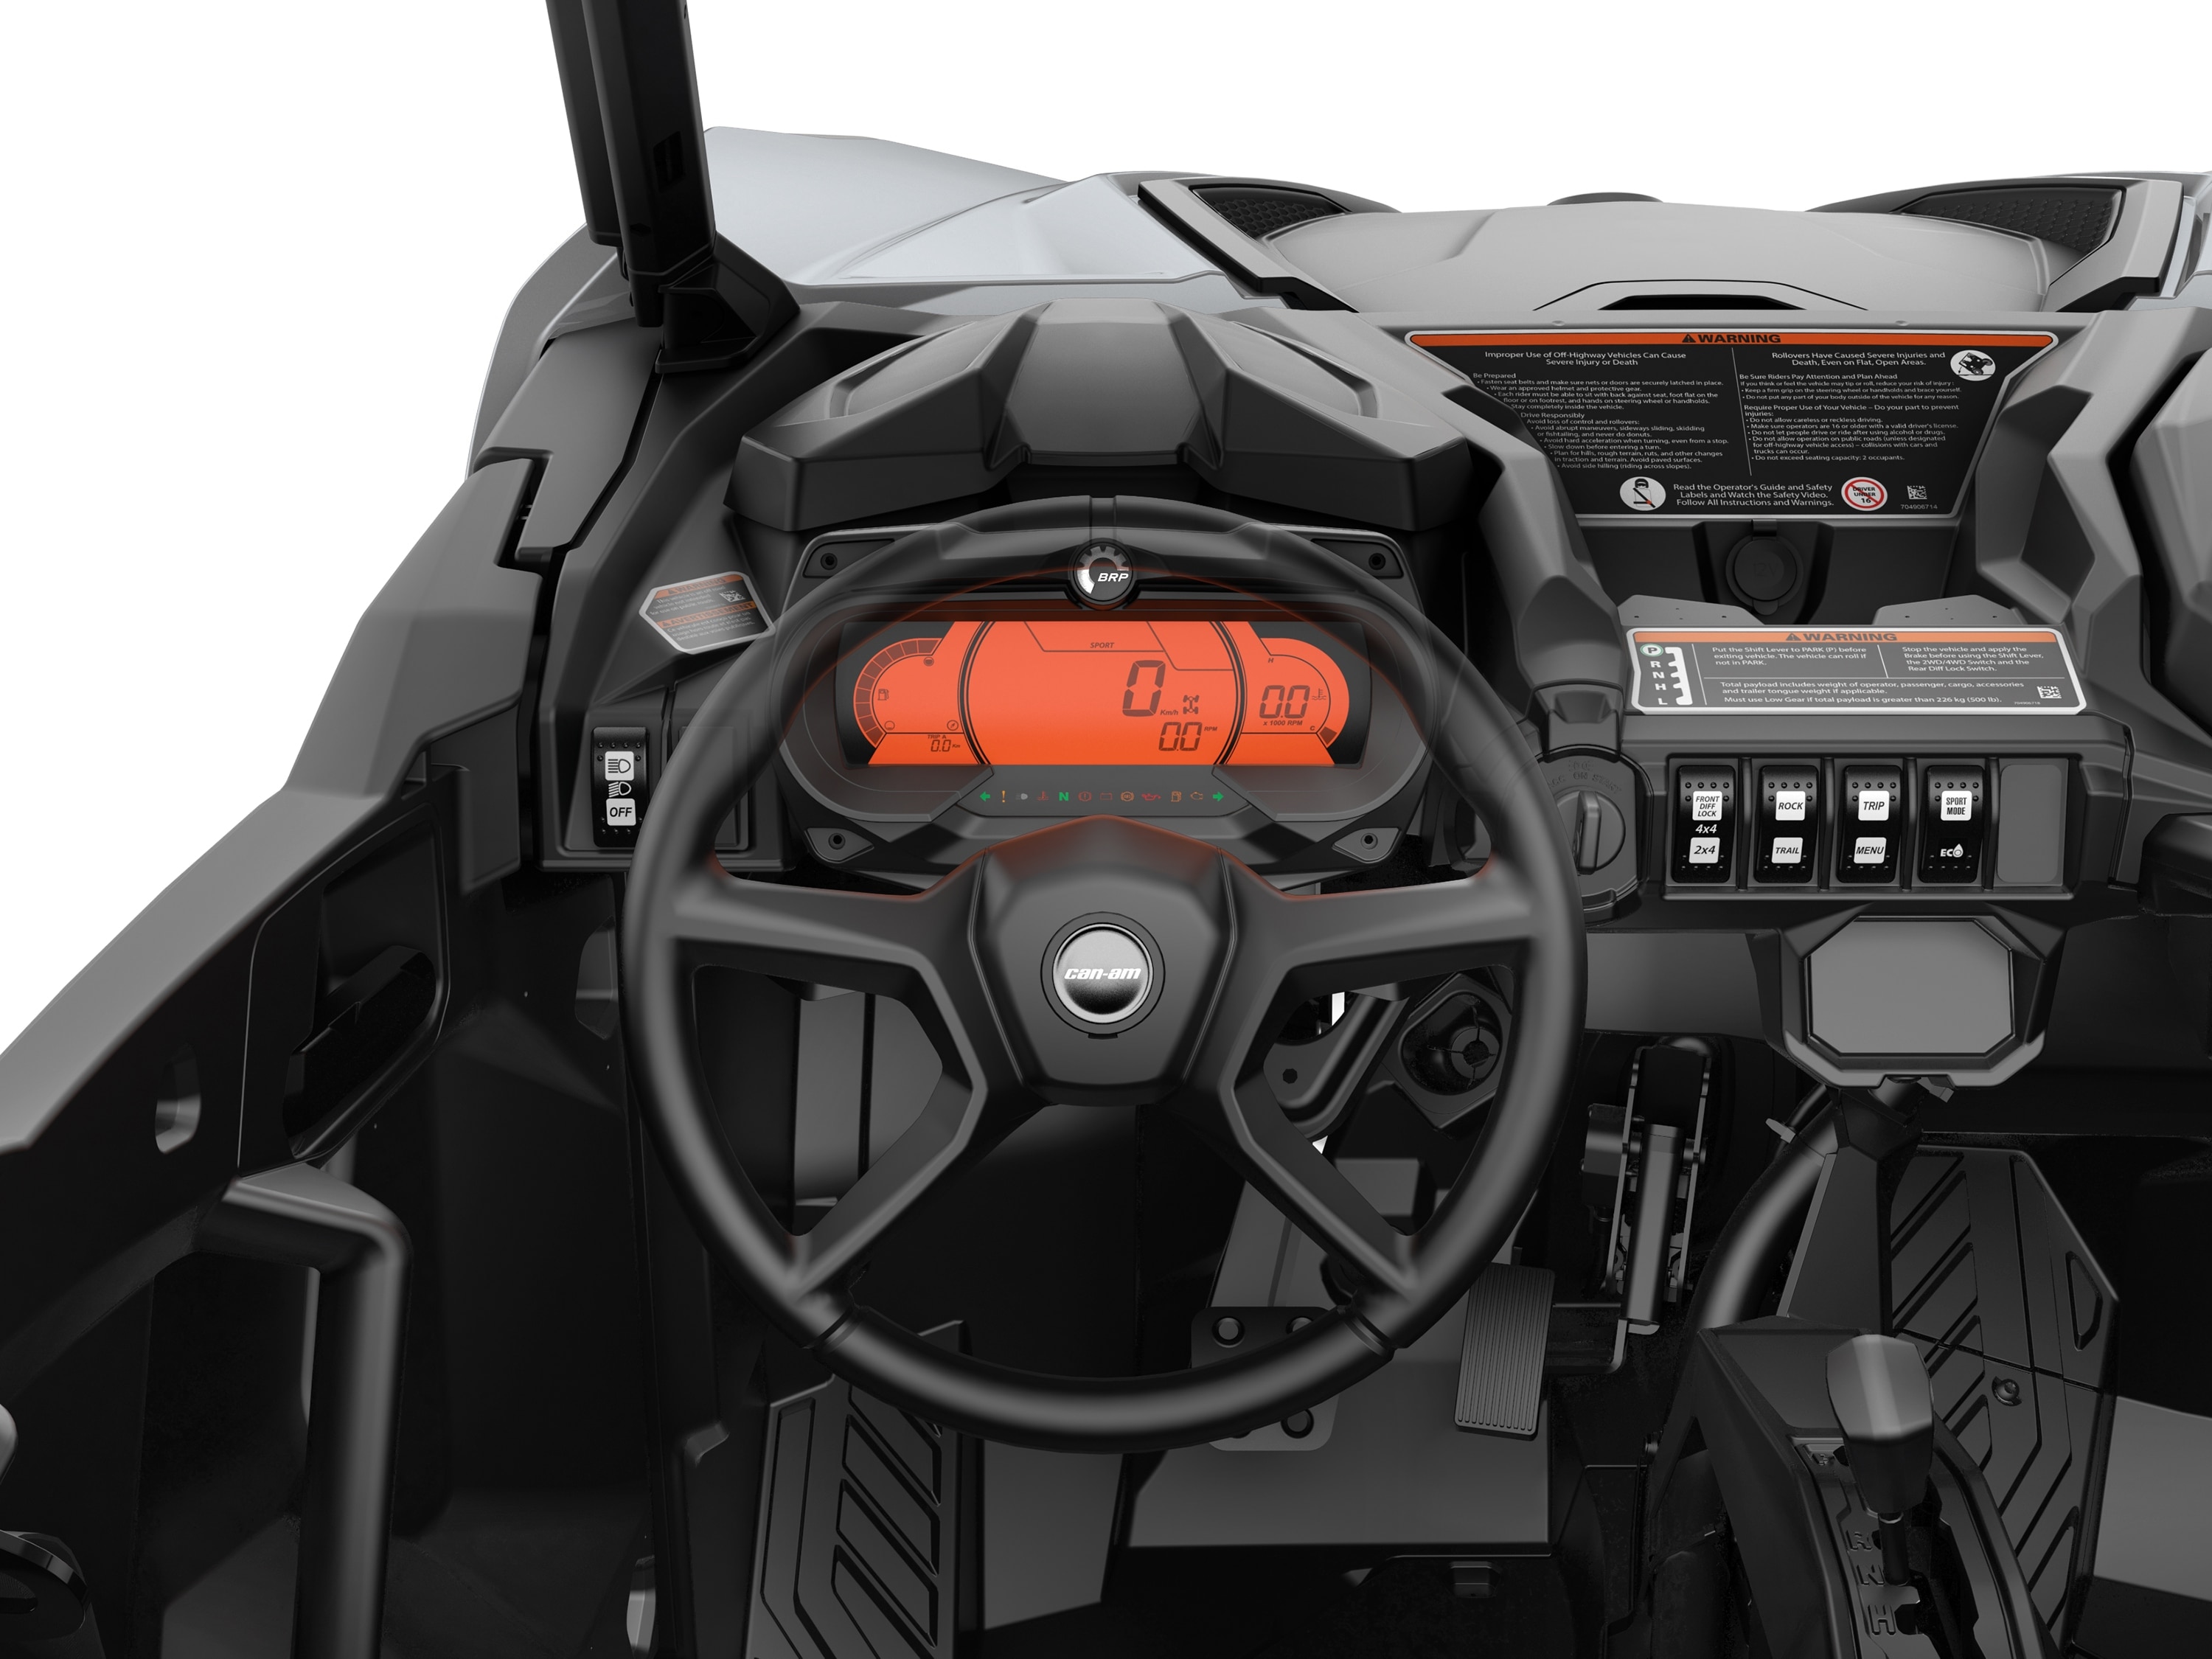 Can-Am Maverick Sport 7.6 in digital display with keypad and interior